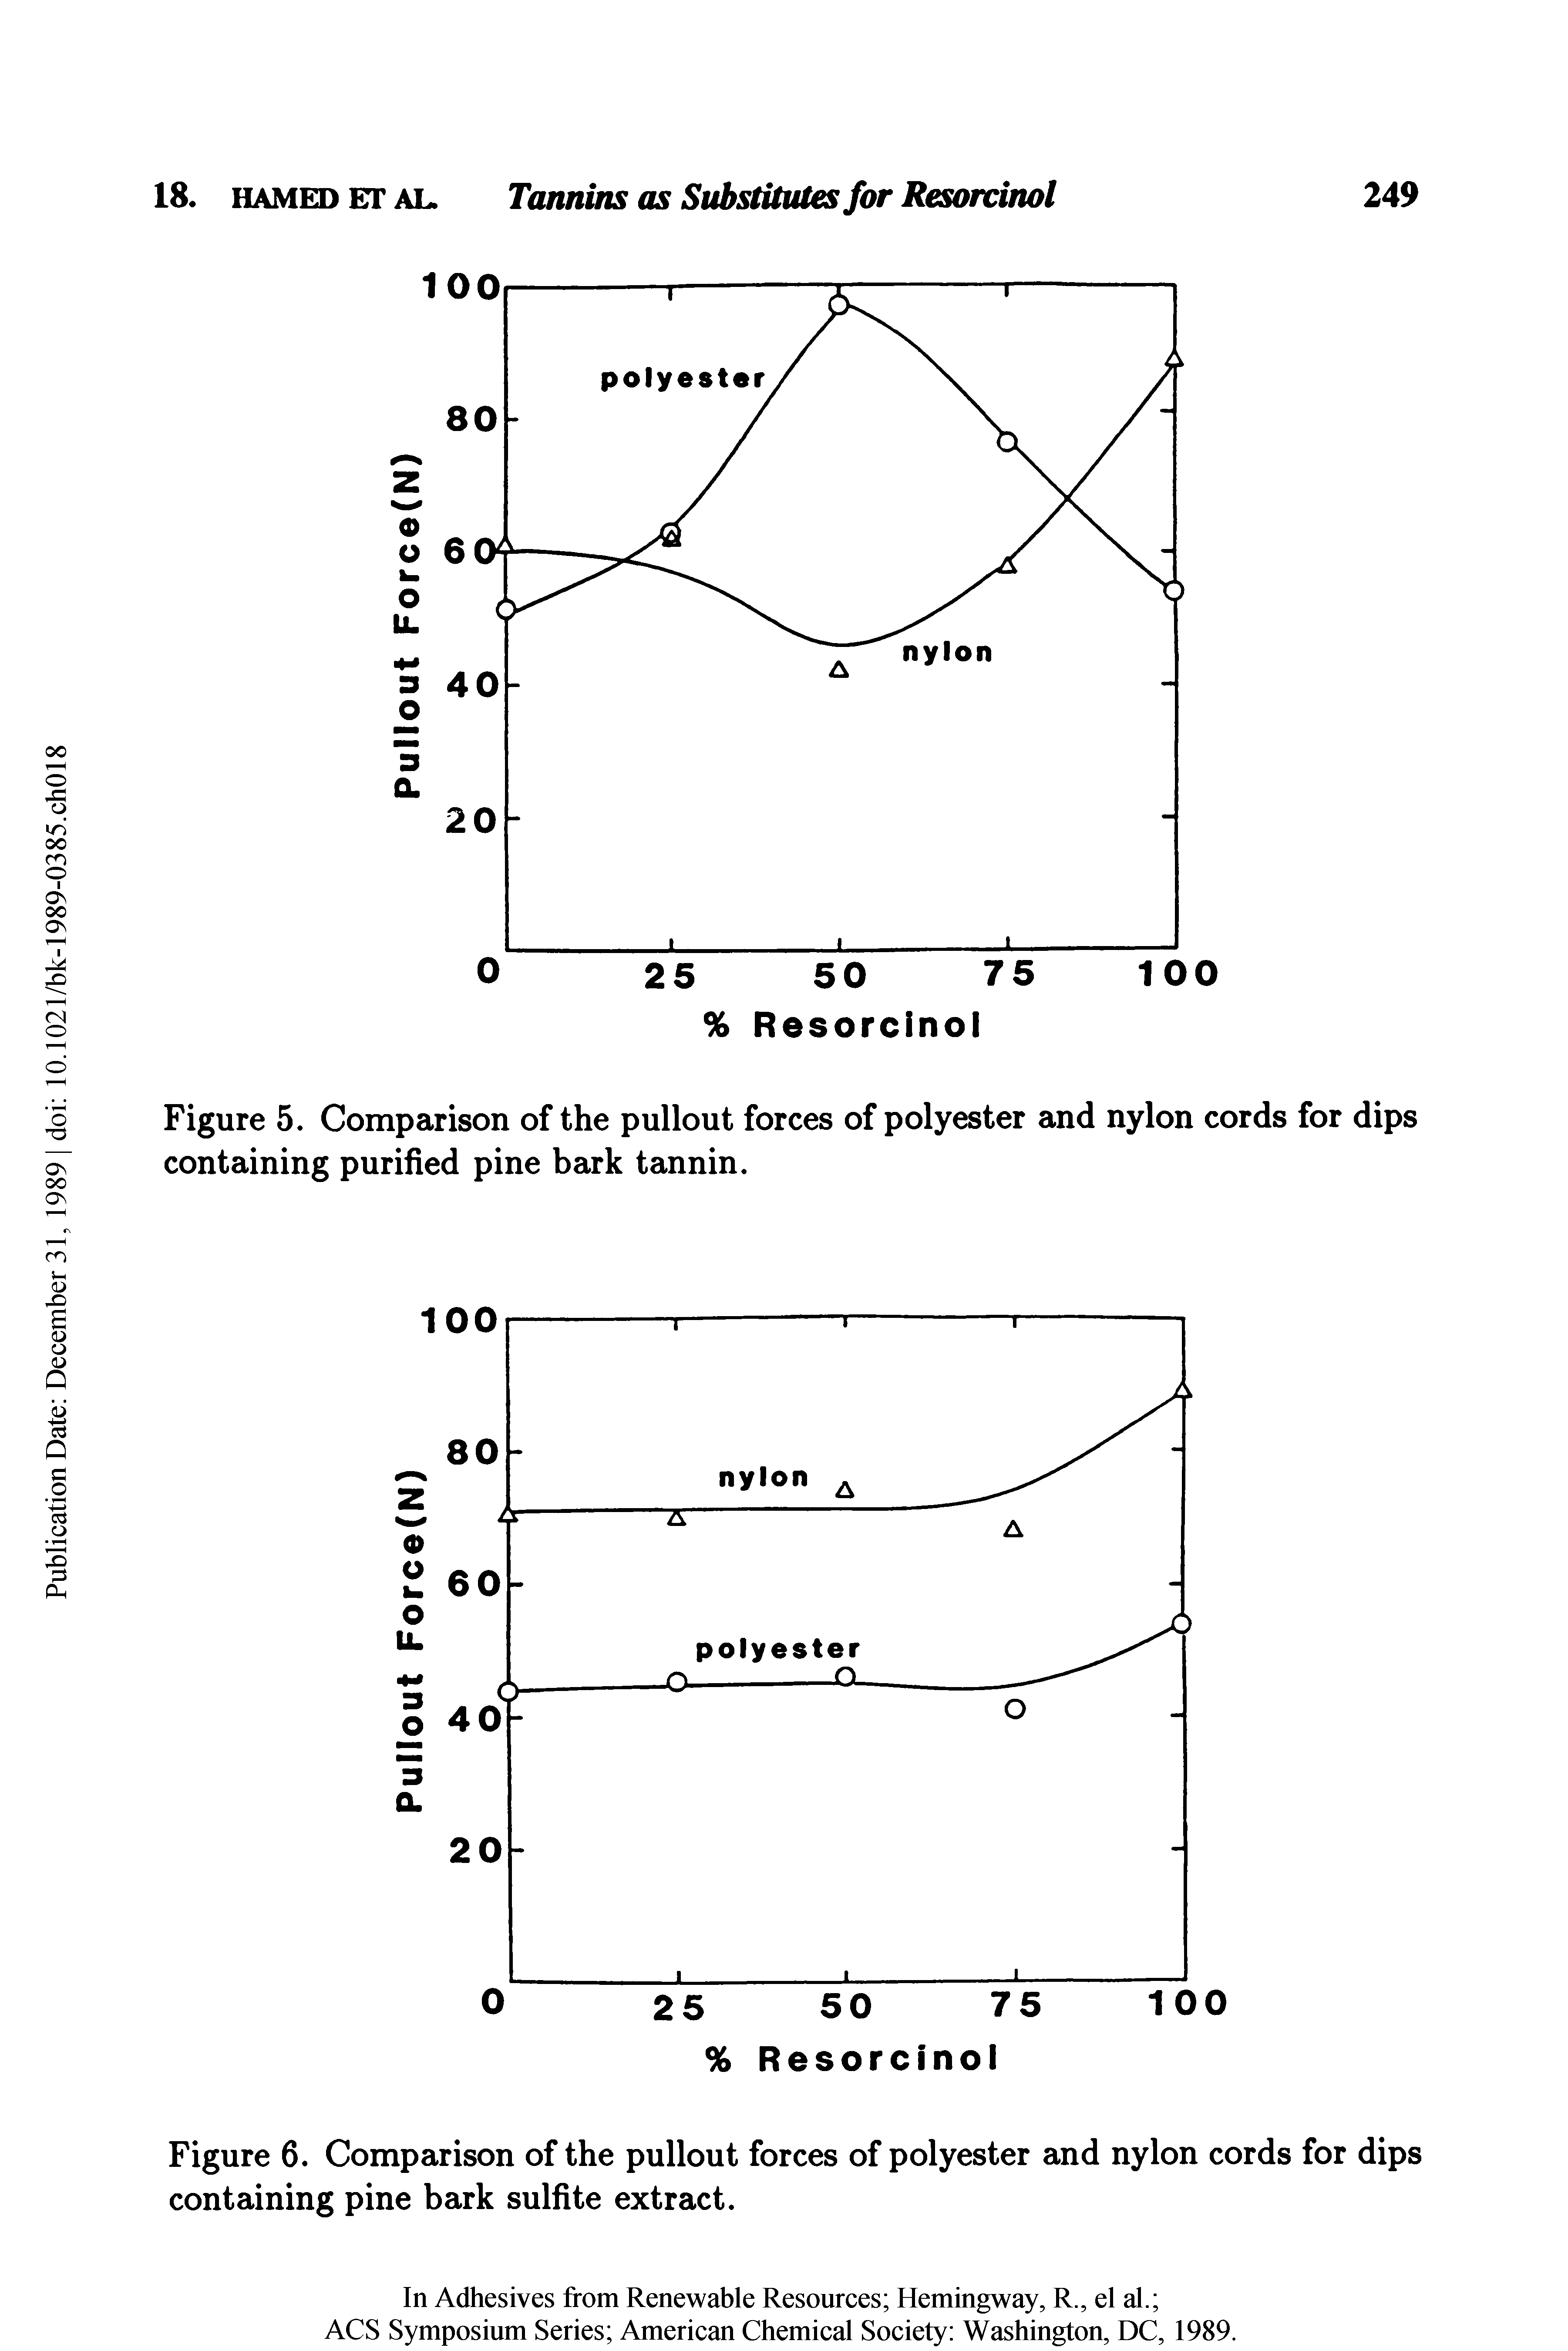 Figure 6. Comparison of the pullout forces of polyester and nylon cords for dips containing pine bark sulfite extract.